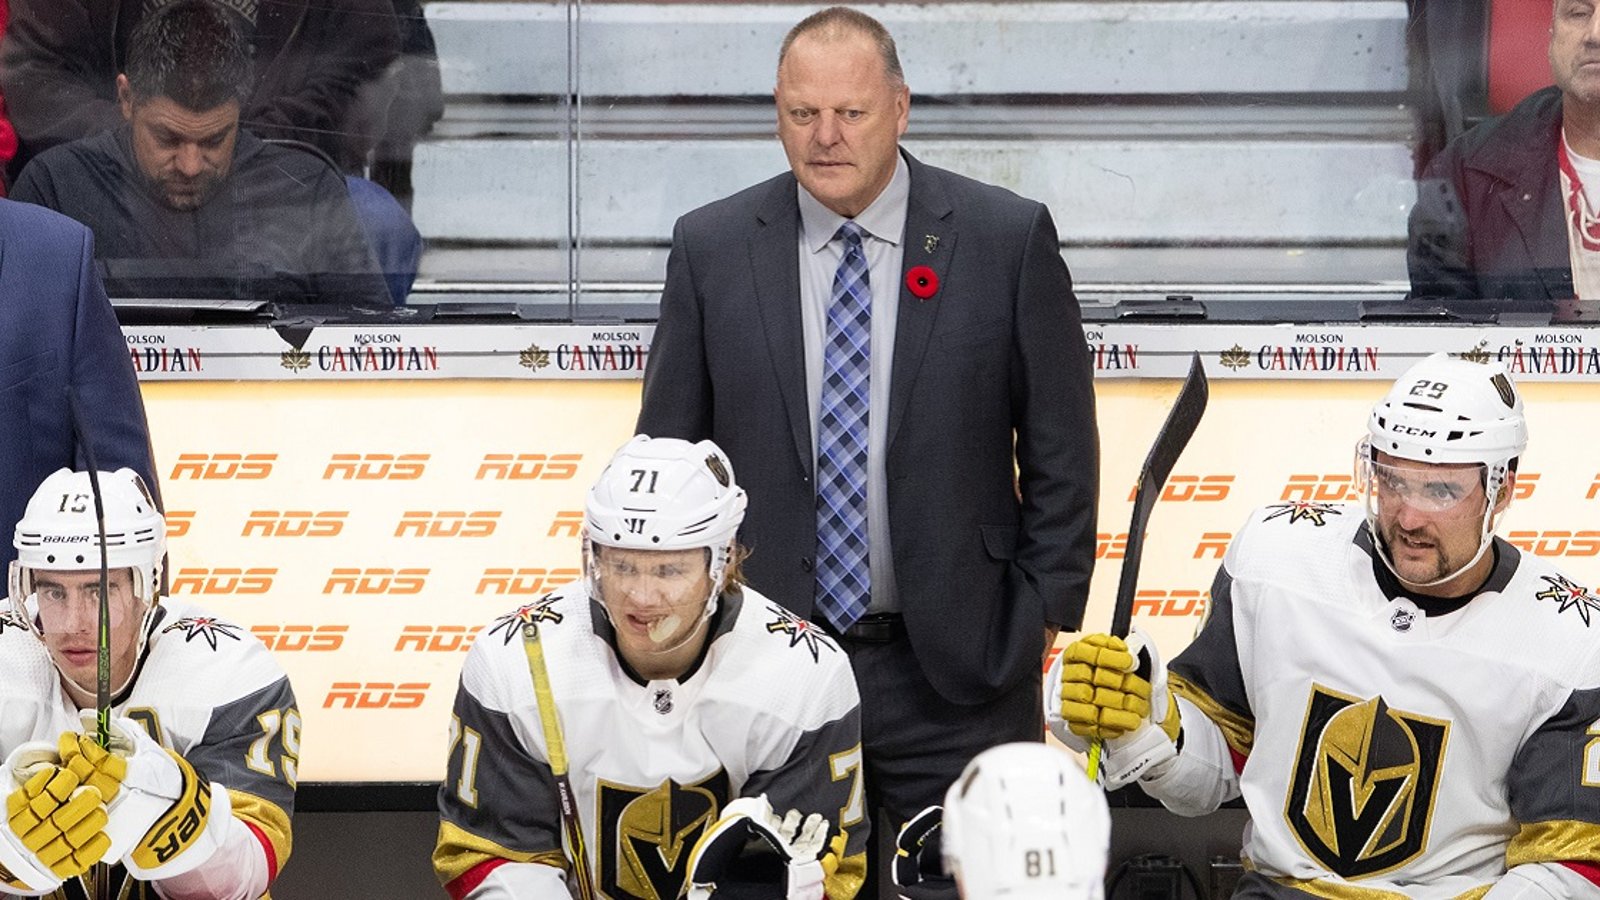 Gerard Gallant comments on the Golden Knights decision to replace him behind the bench.